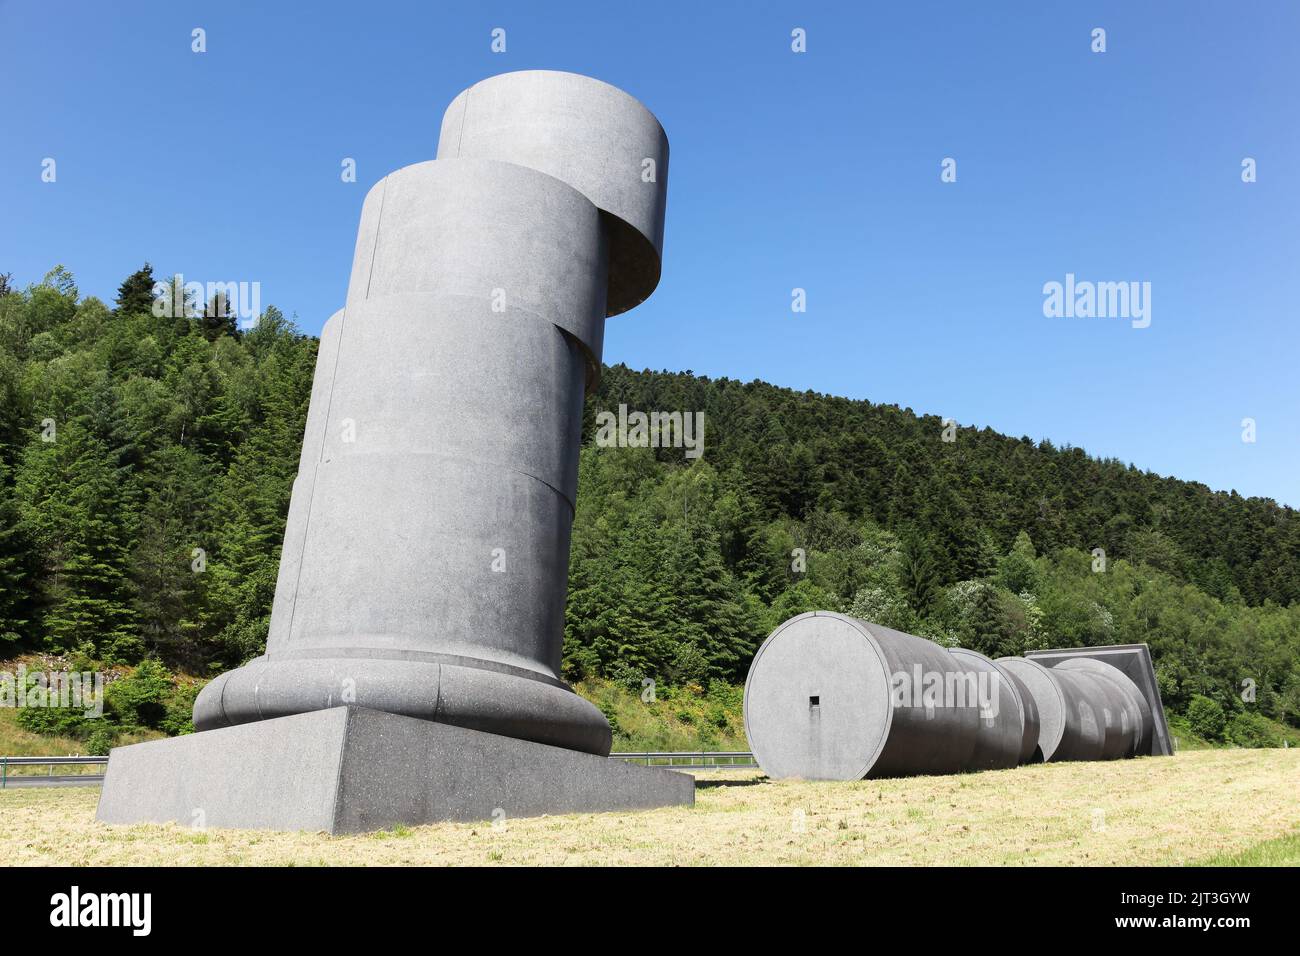 Les Salles, France - June 23, 2016: The broken Column is a monumental sculpture representing a collapsed 40-meter column in Les Salles, France Stock Photo